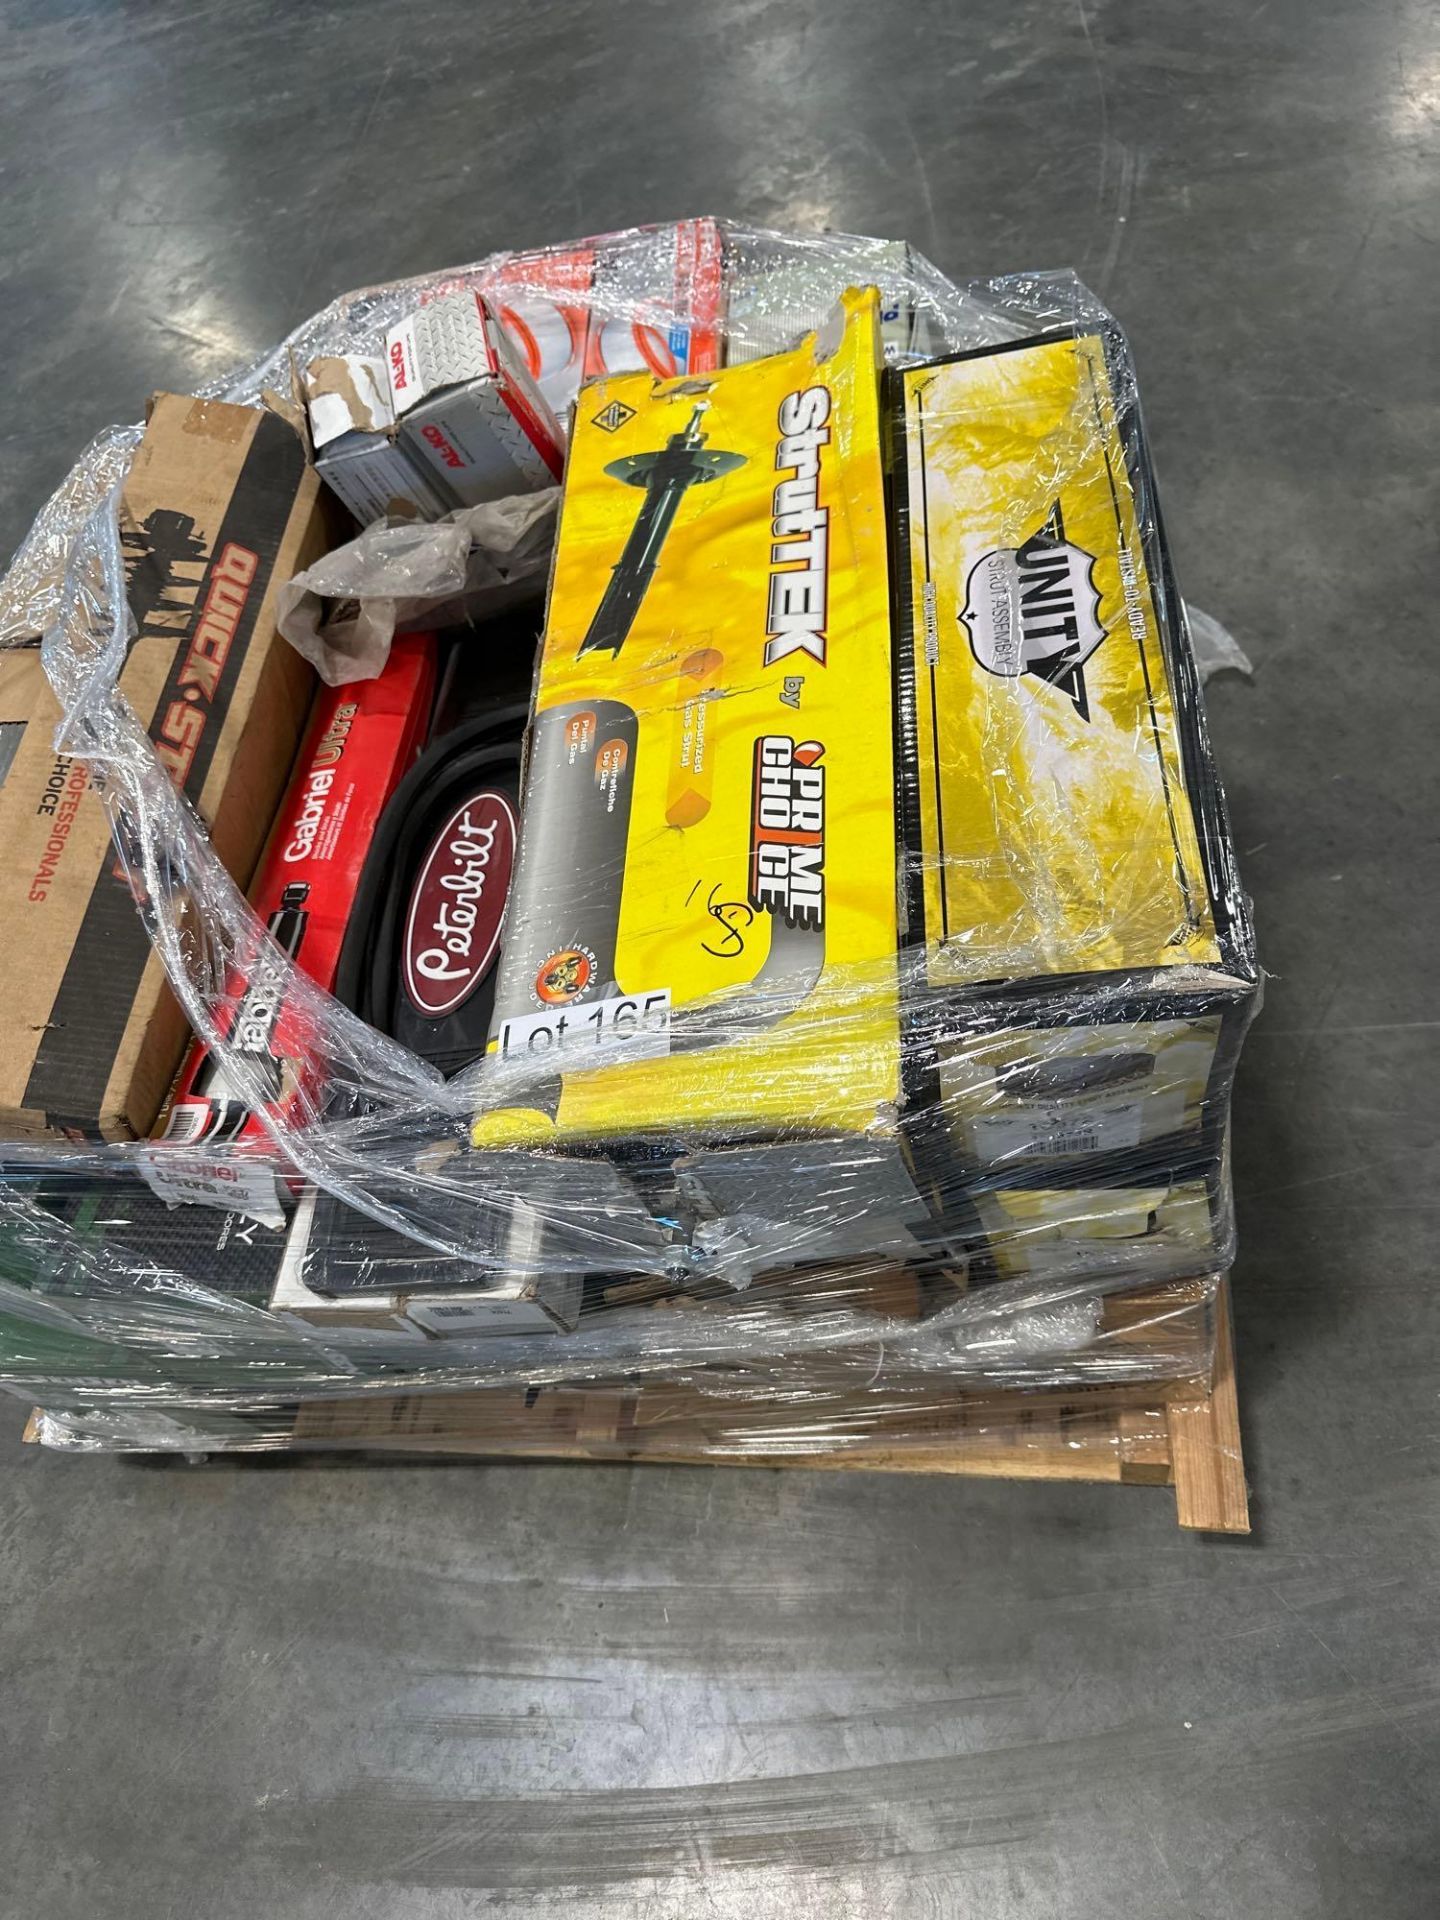 pallet of Auto parts, new inbox and shocks - Image 3 of 7